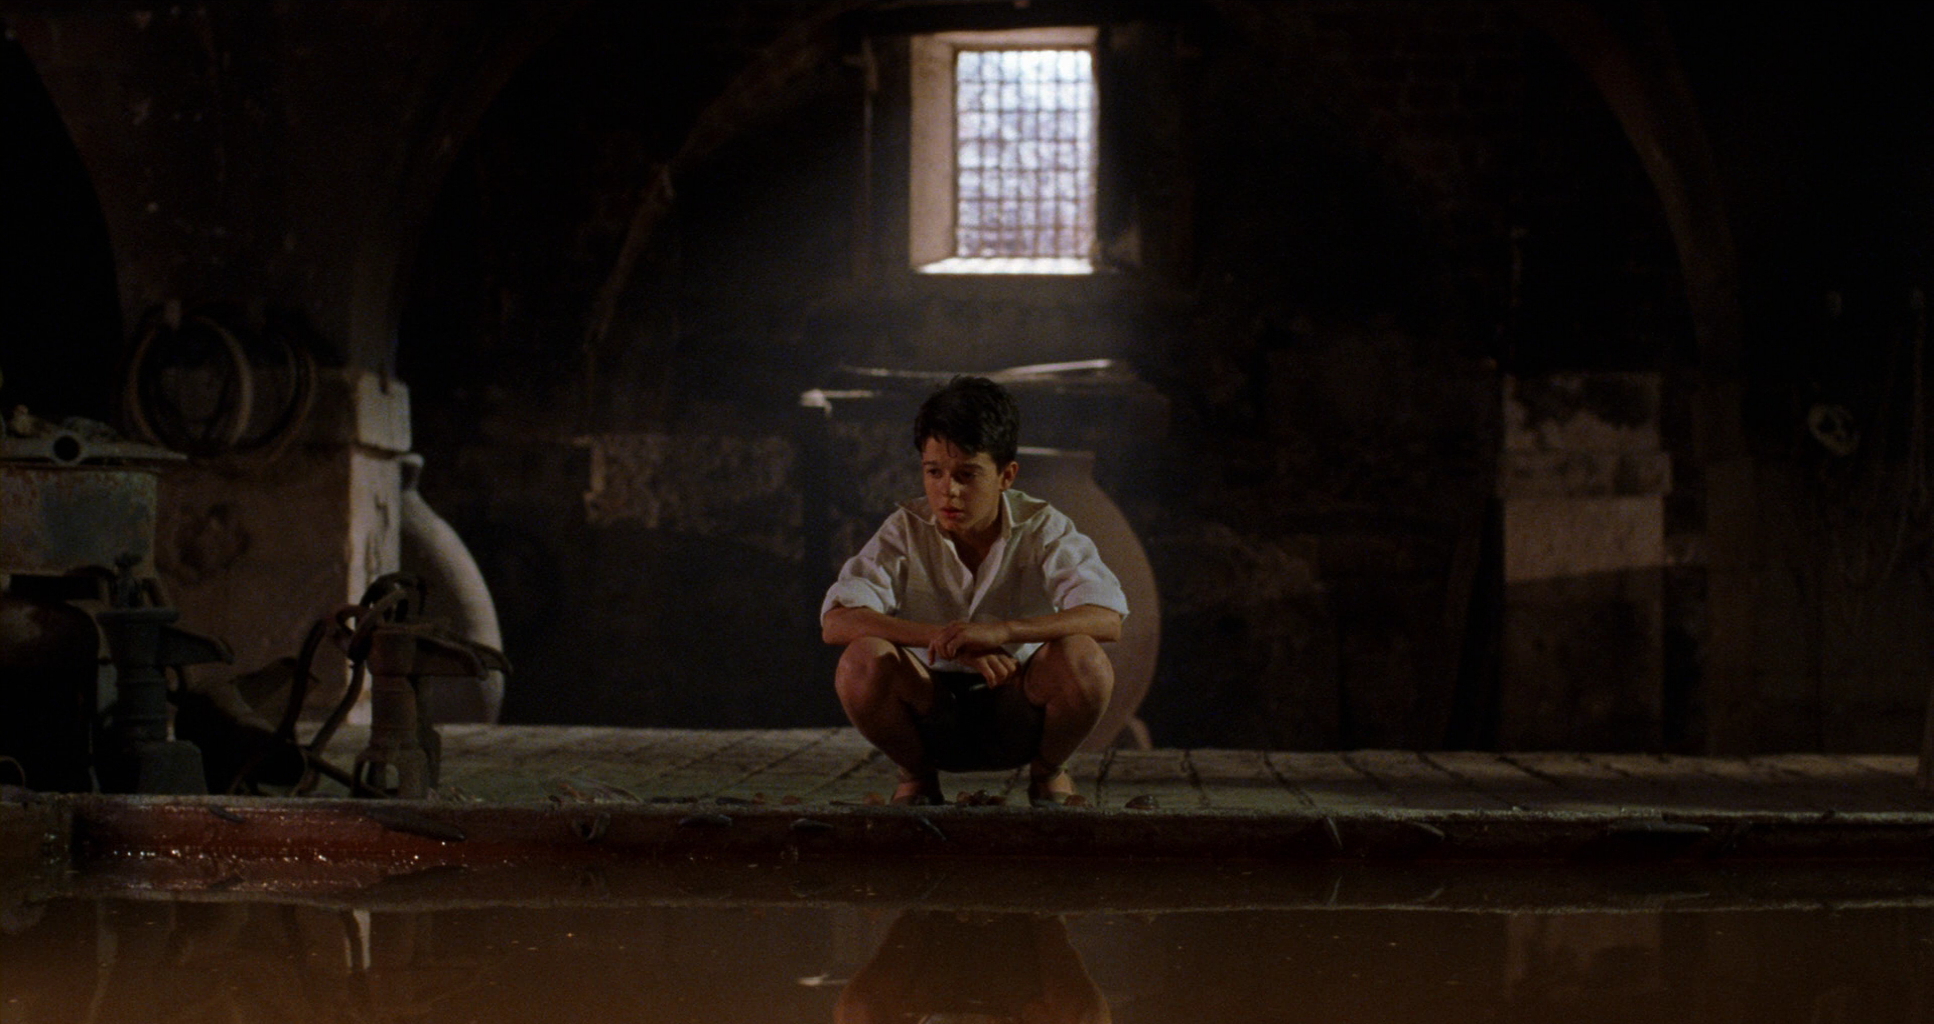 A young boy crouches over a brackish pool of water in a scene from 'The Devil's Backbone'